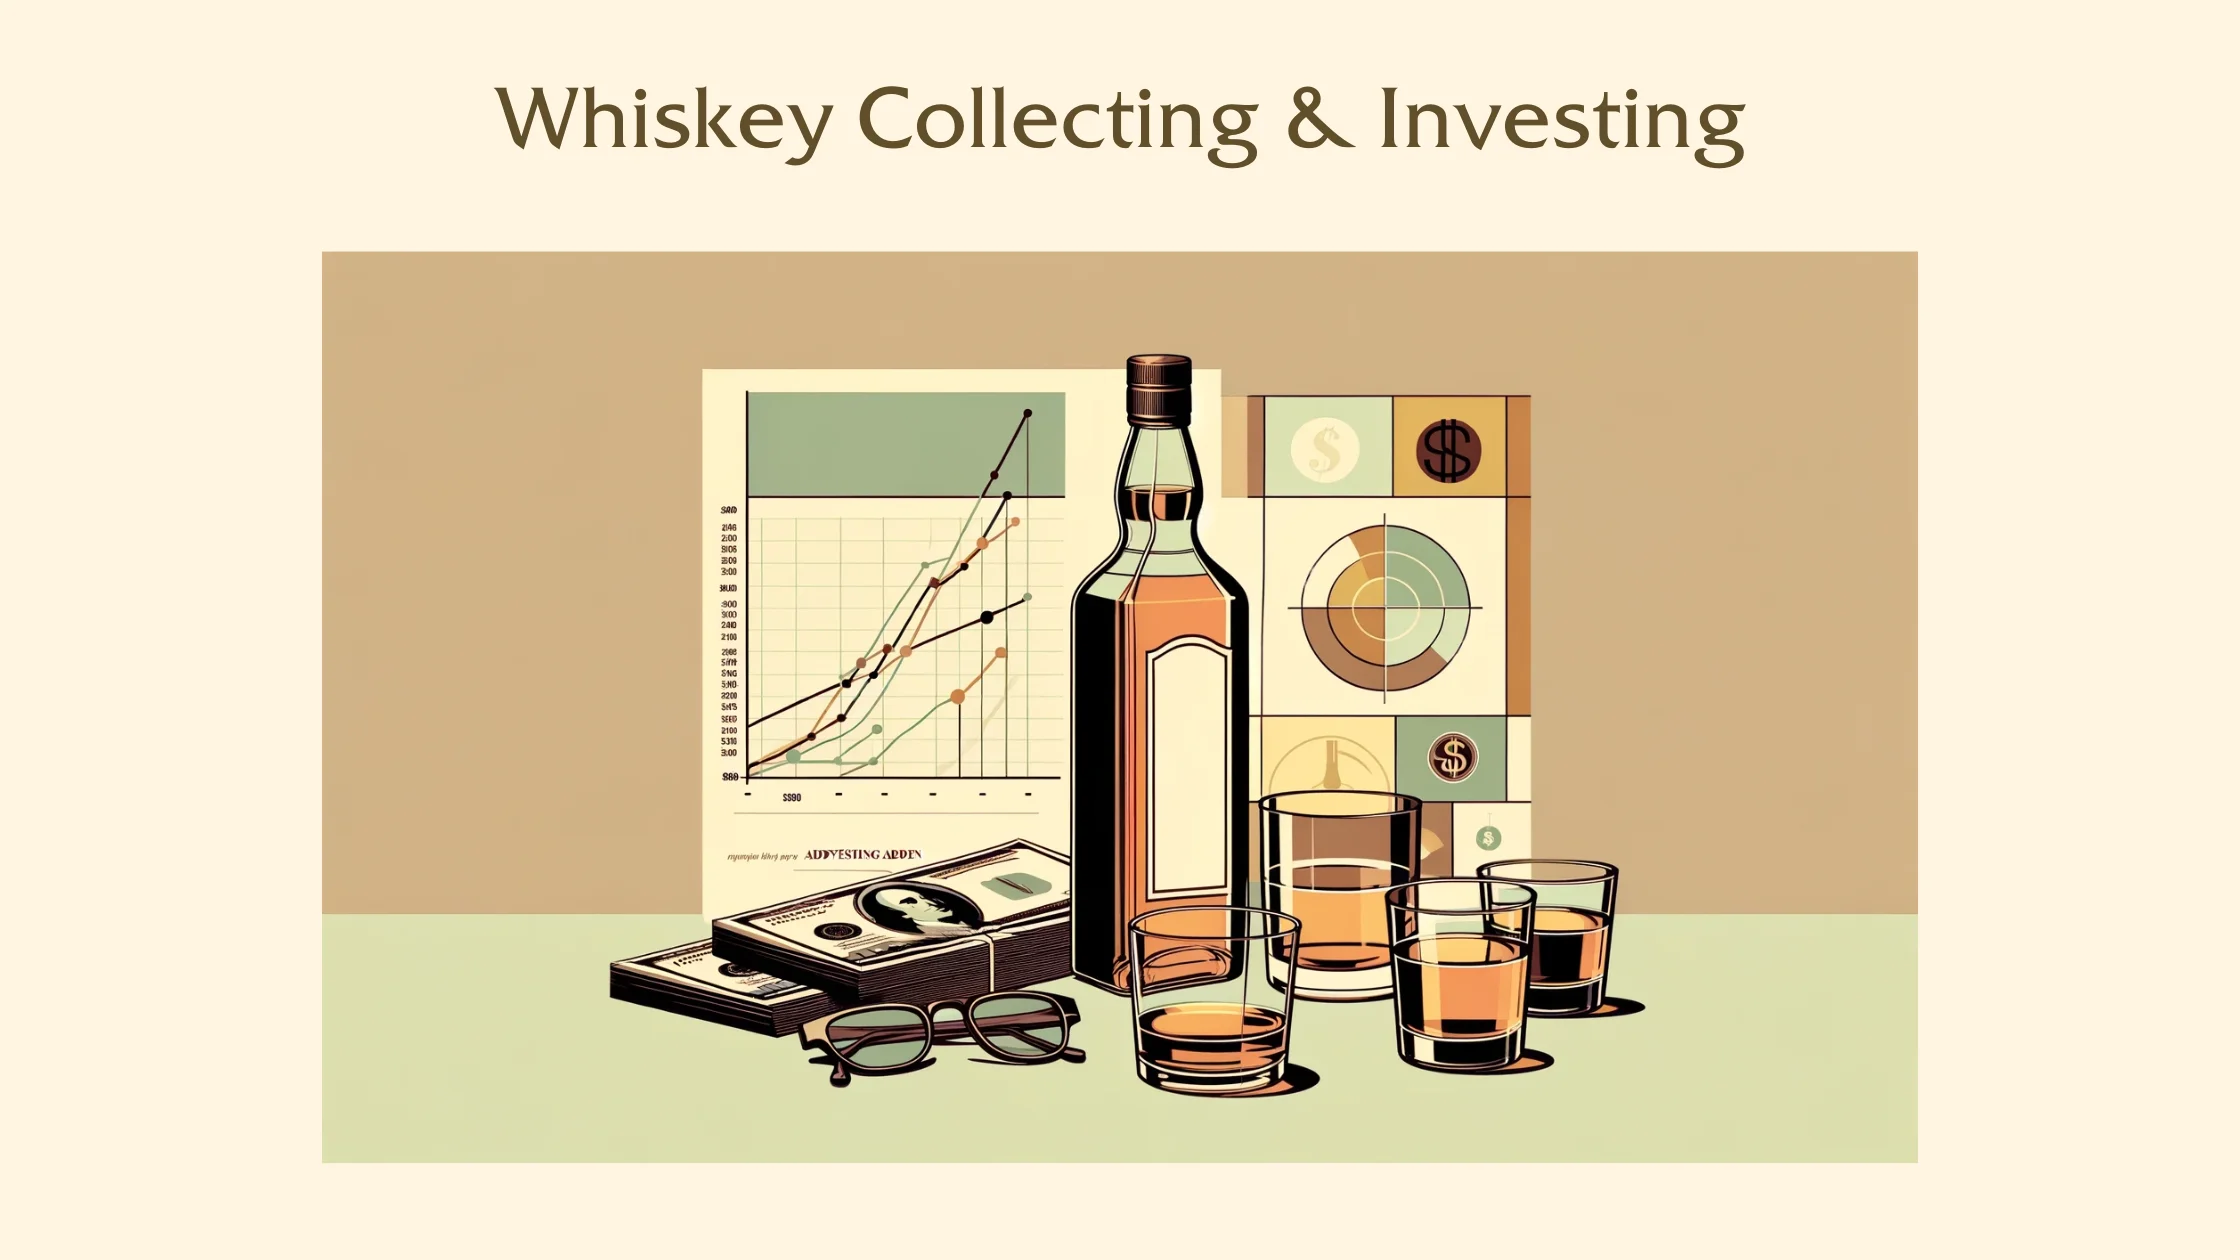 Illustration of whiskey investing with bottle, glasses, and charts.